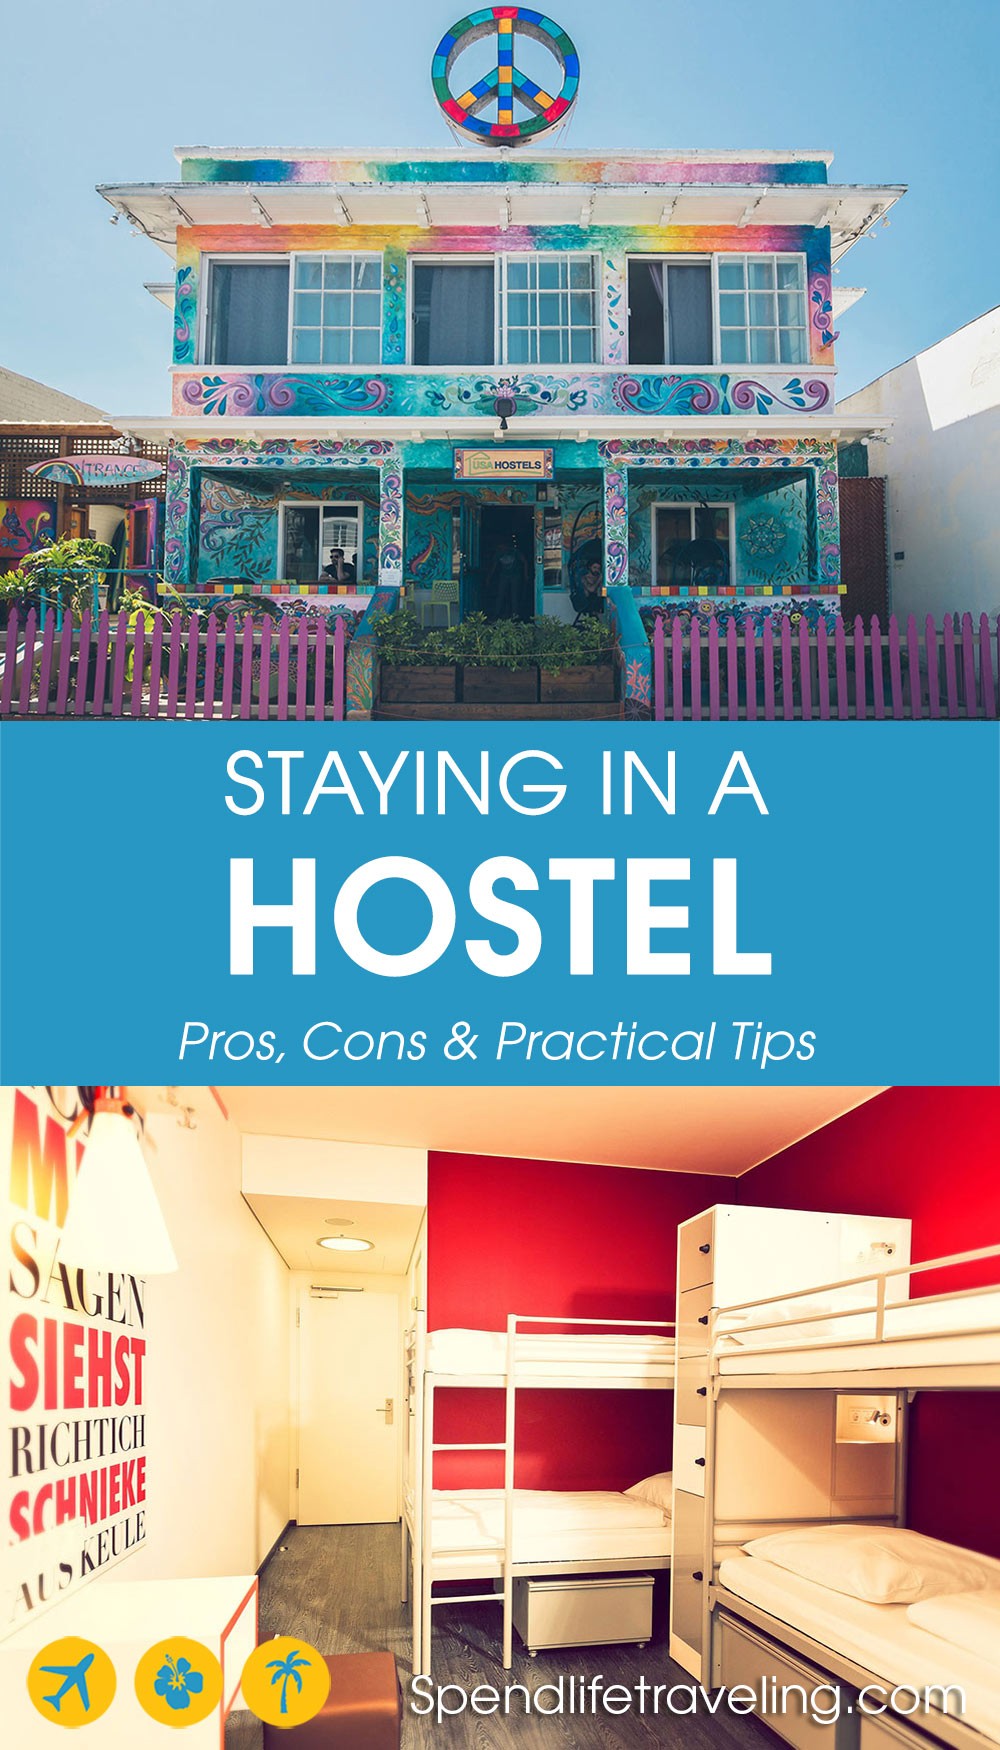 Pros and cons of staying in a hostel